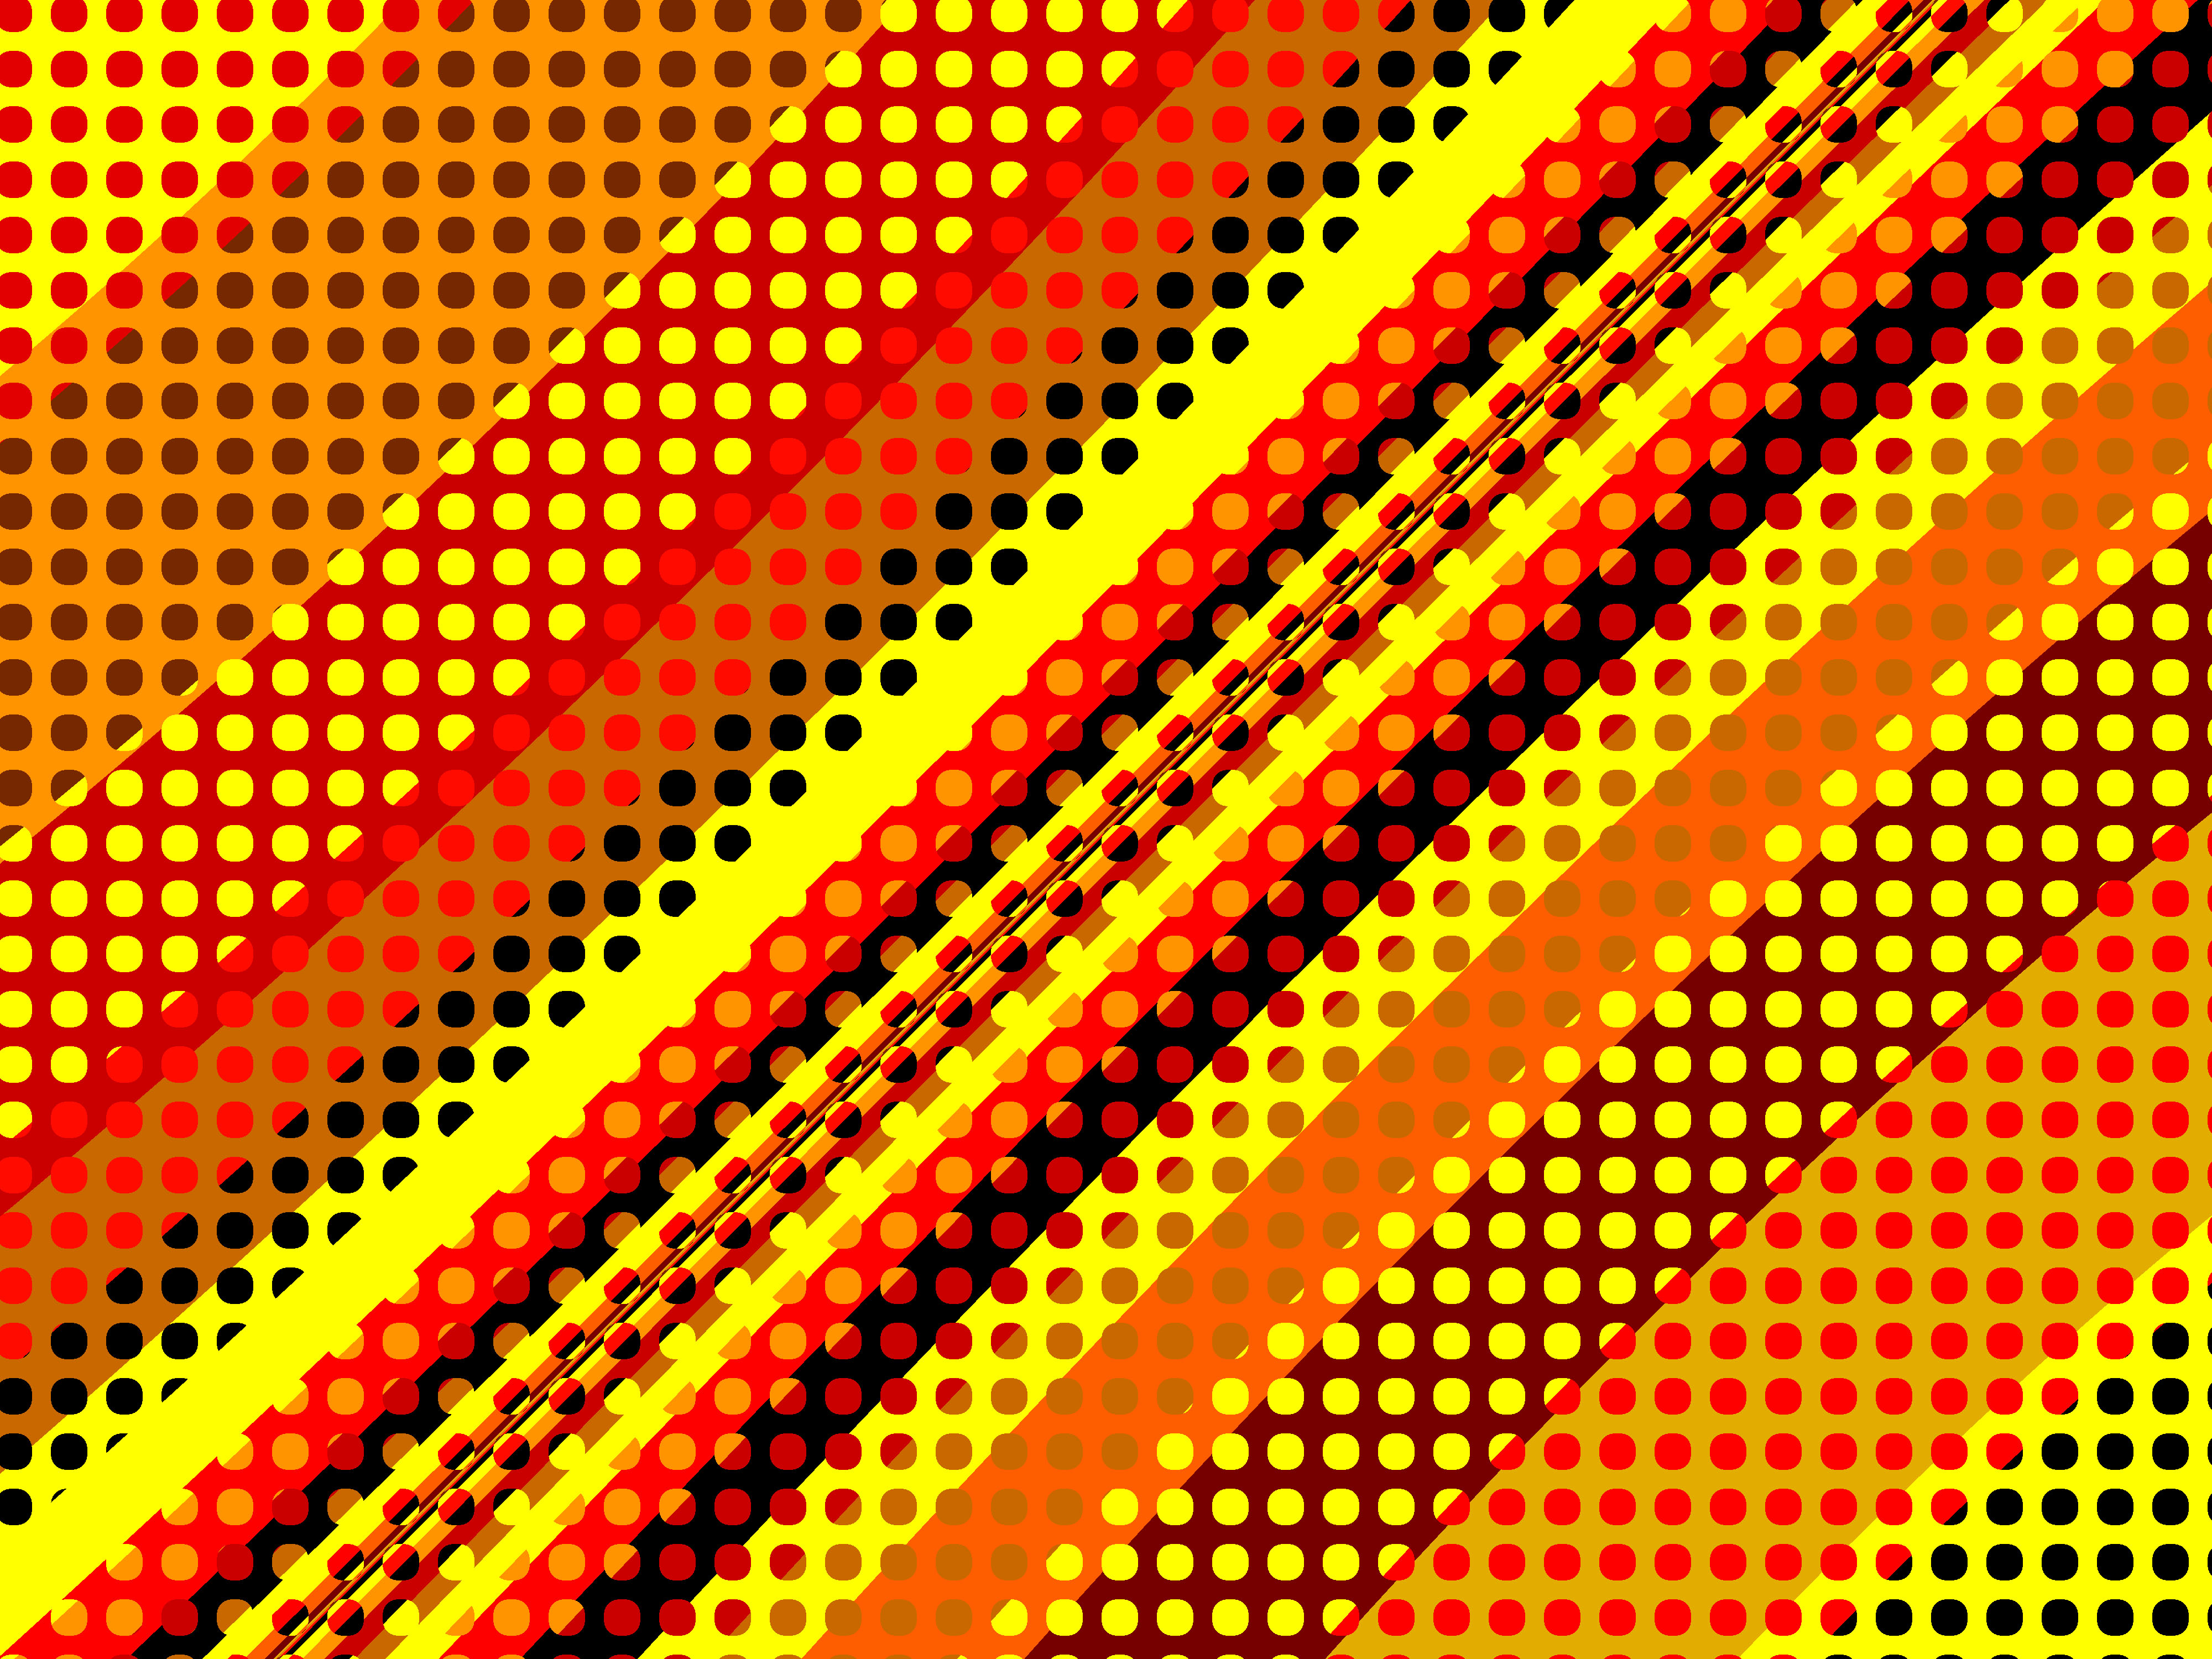 Colorful Dots 4000x3000